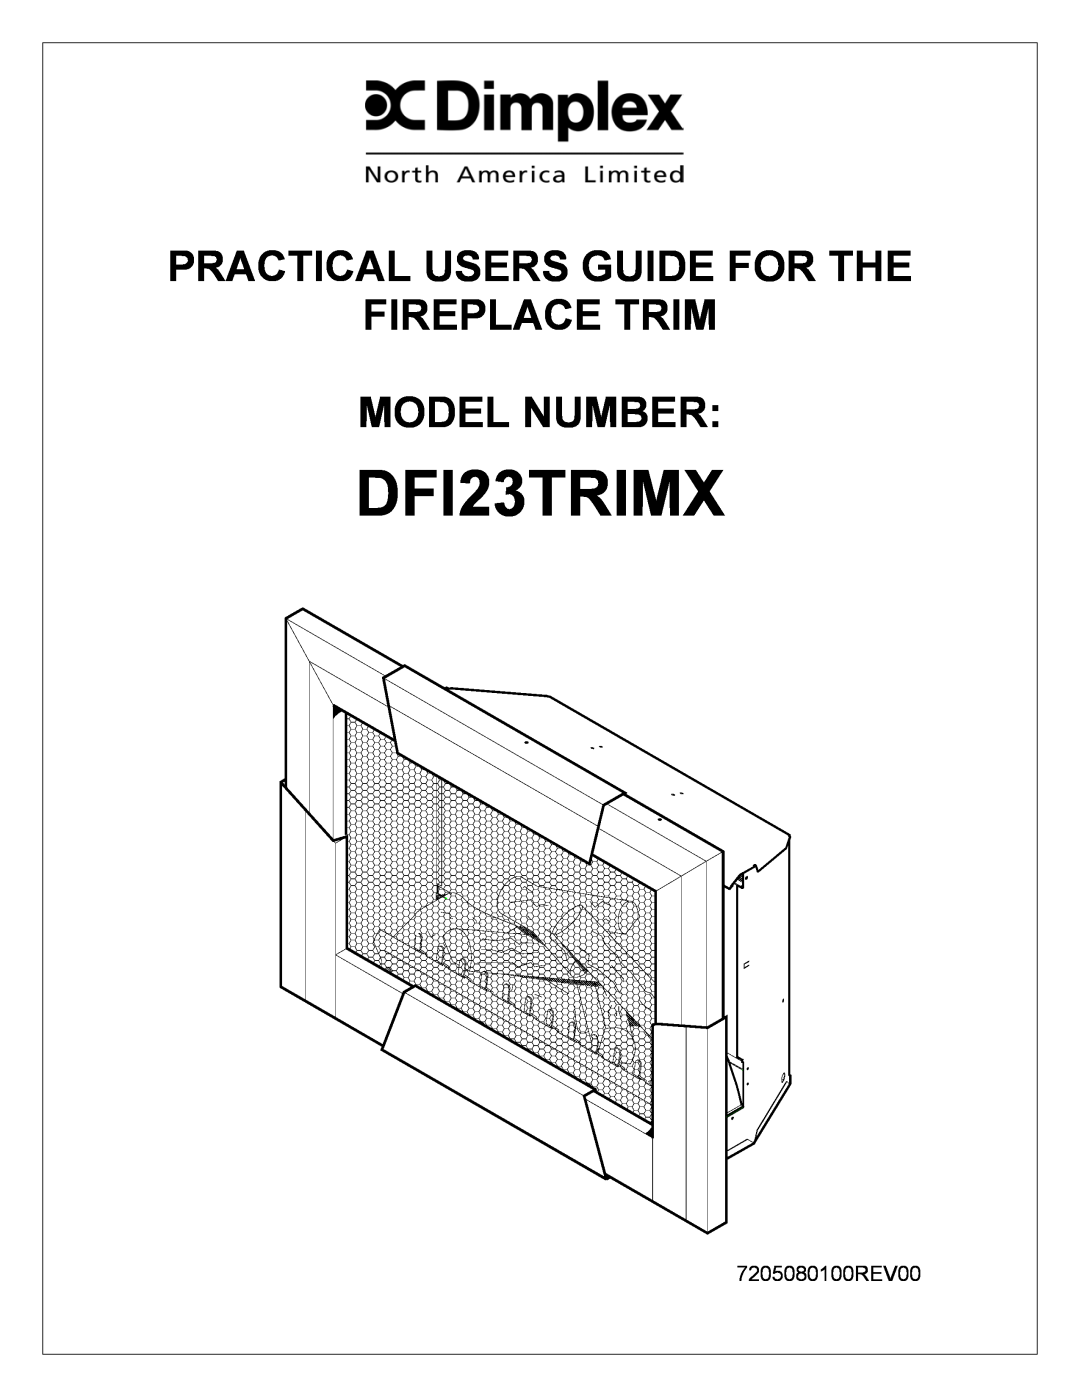 Dimplex DFI23TRIMX manual Practical Users Guide For The, Fireplace Trim, Model Number, 7205080100REV00 